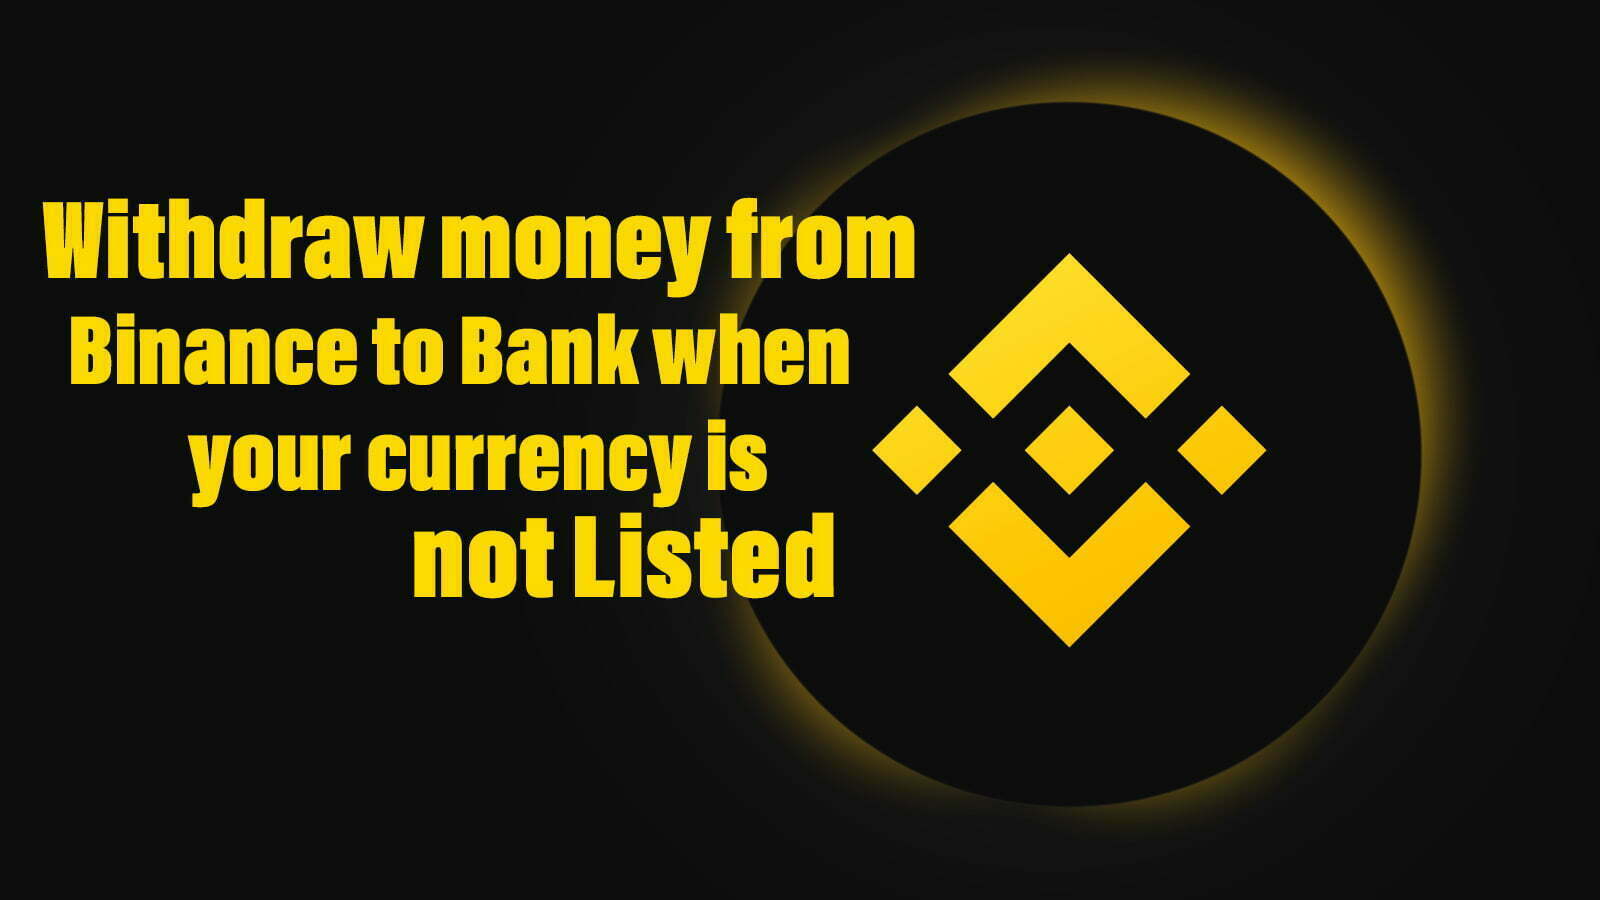 How to Withdraw money from Binance to Bank when your currency is not Listed